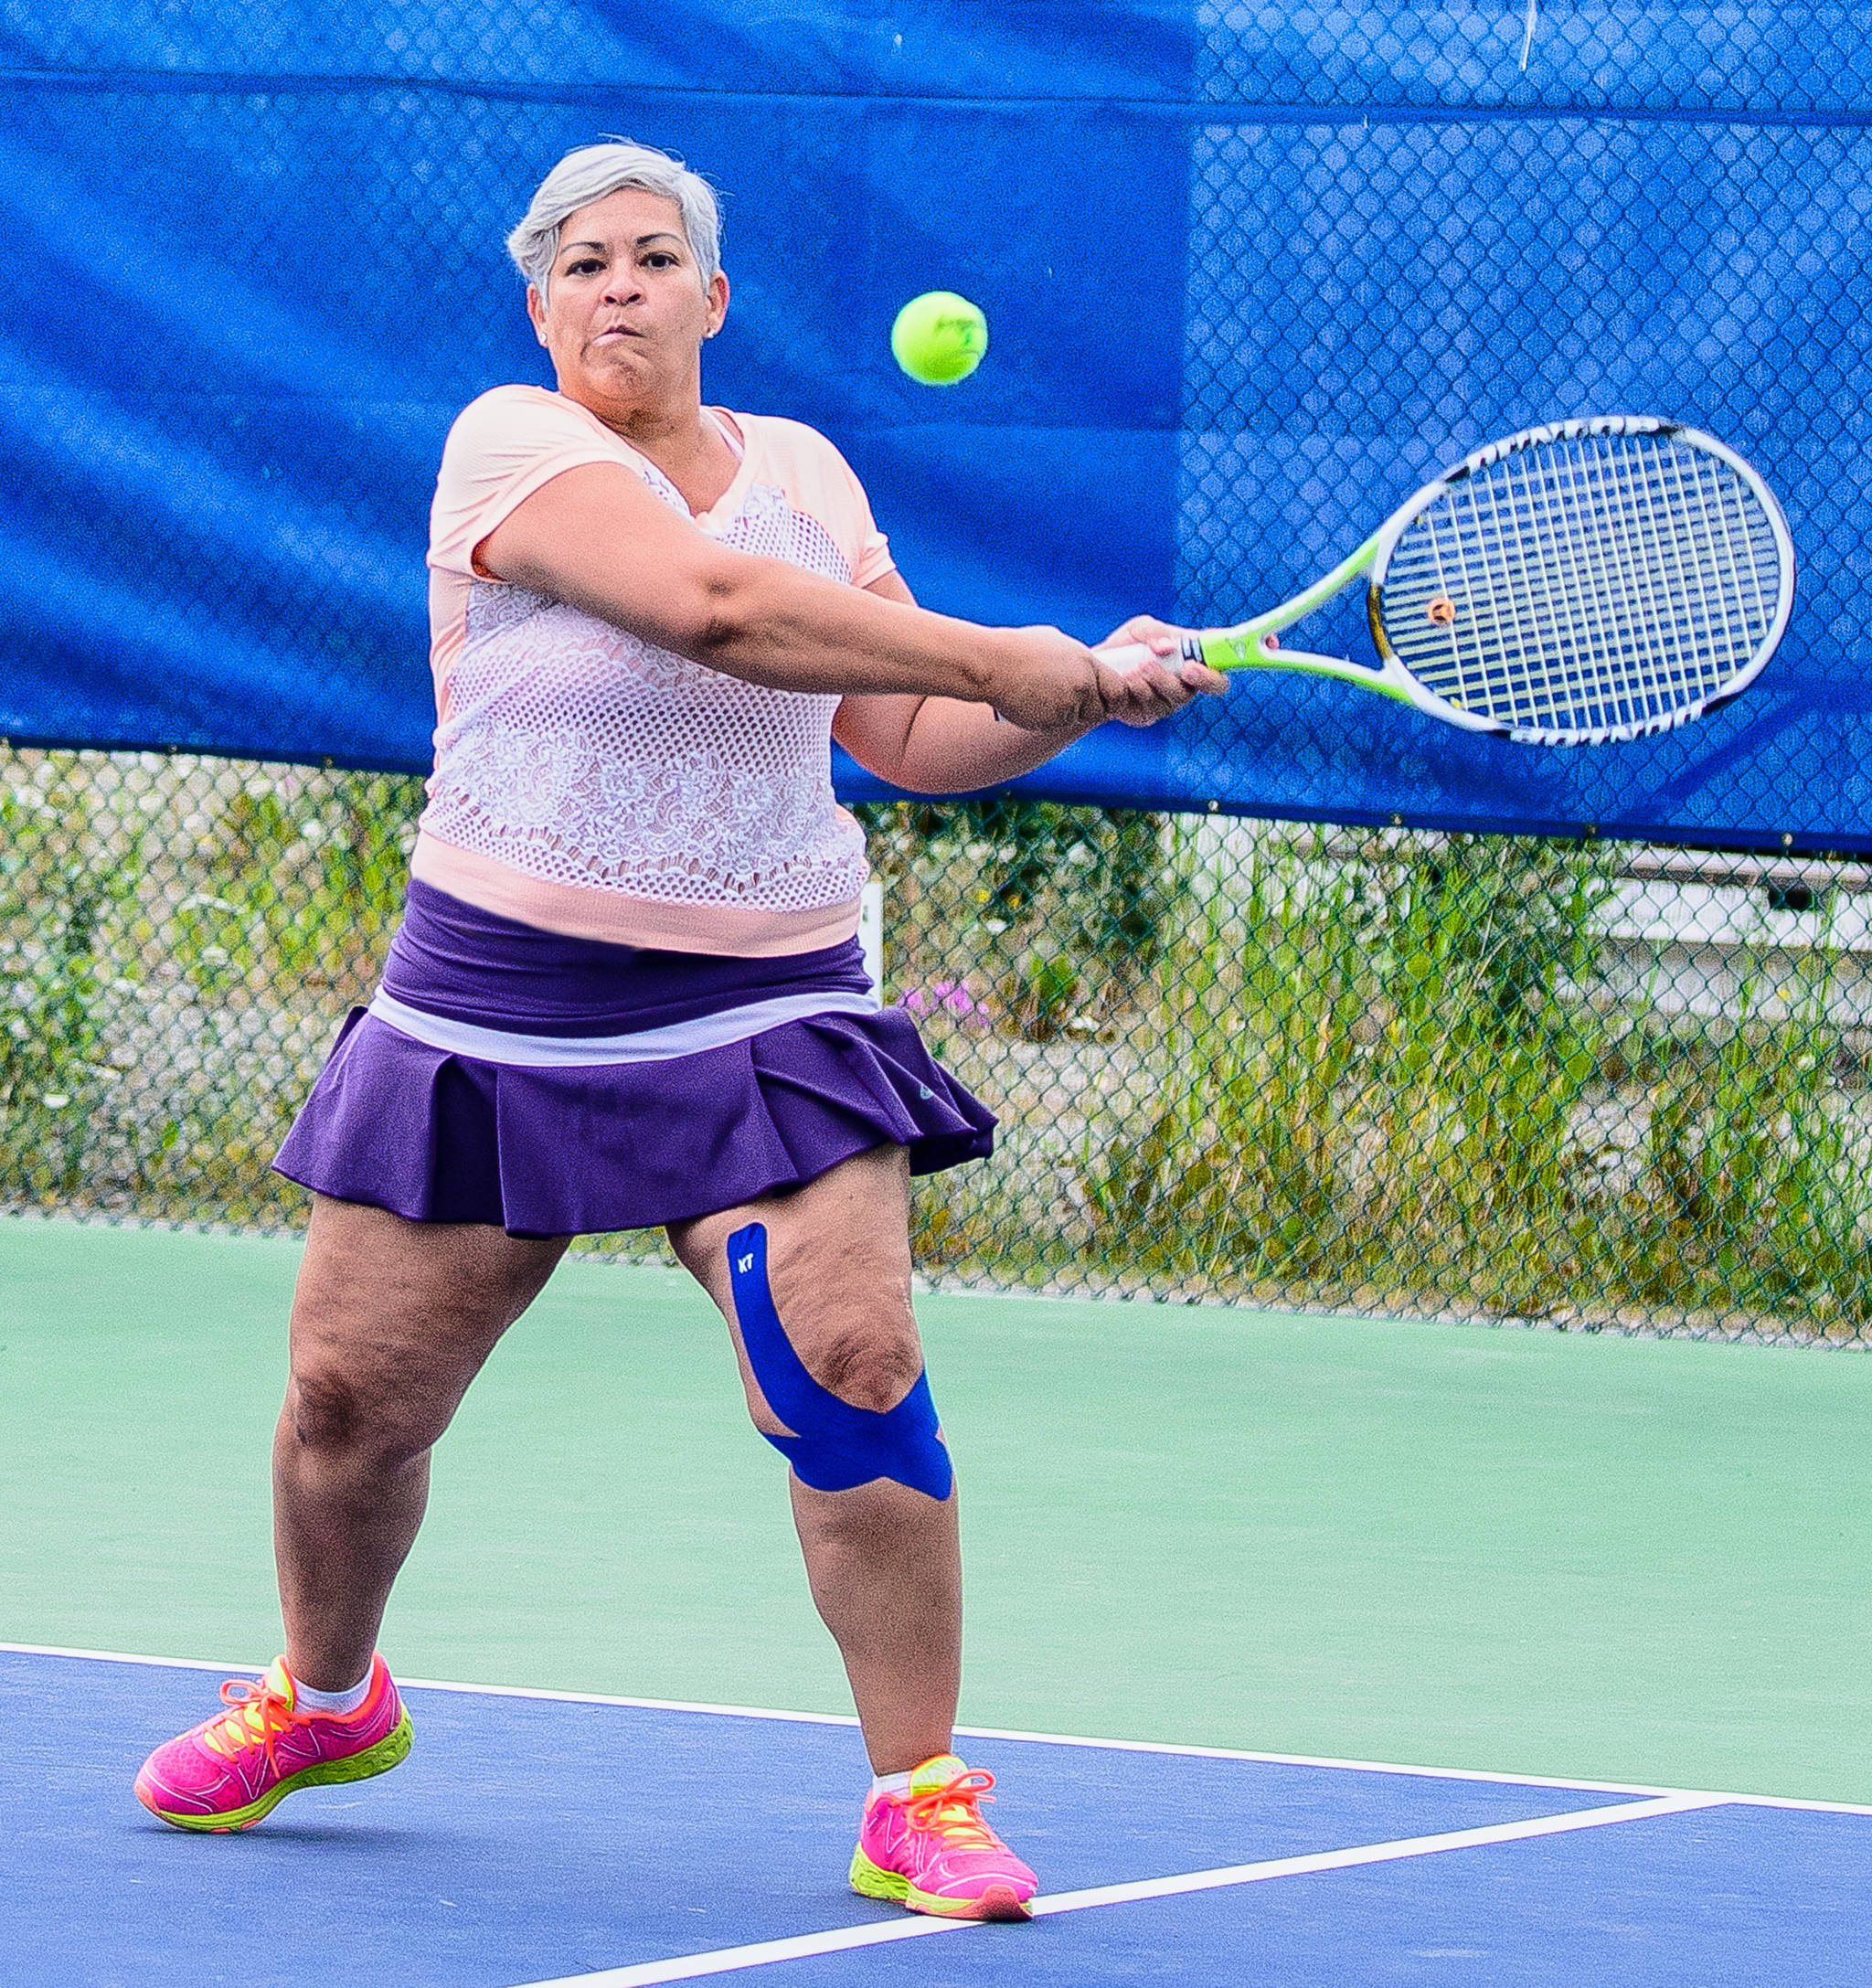 Carmen Cintron of Juneau winds up for a hit during the Capital Cup at the Mount McIntyre Courts in Whitehorse, Yukon, on Saturday, July 13, 2019. Whitehorse beat Juneau 464-415 in the three-day tennis competition between the sister cities. It was the 21st time the event has taken place after beginning in 1983. (Courtesy Photo | Dennis Senger)